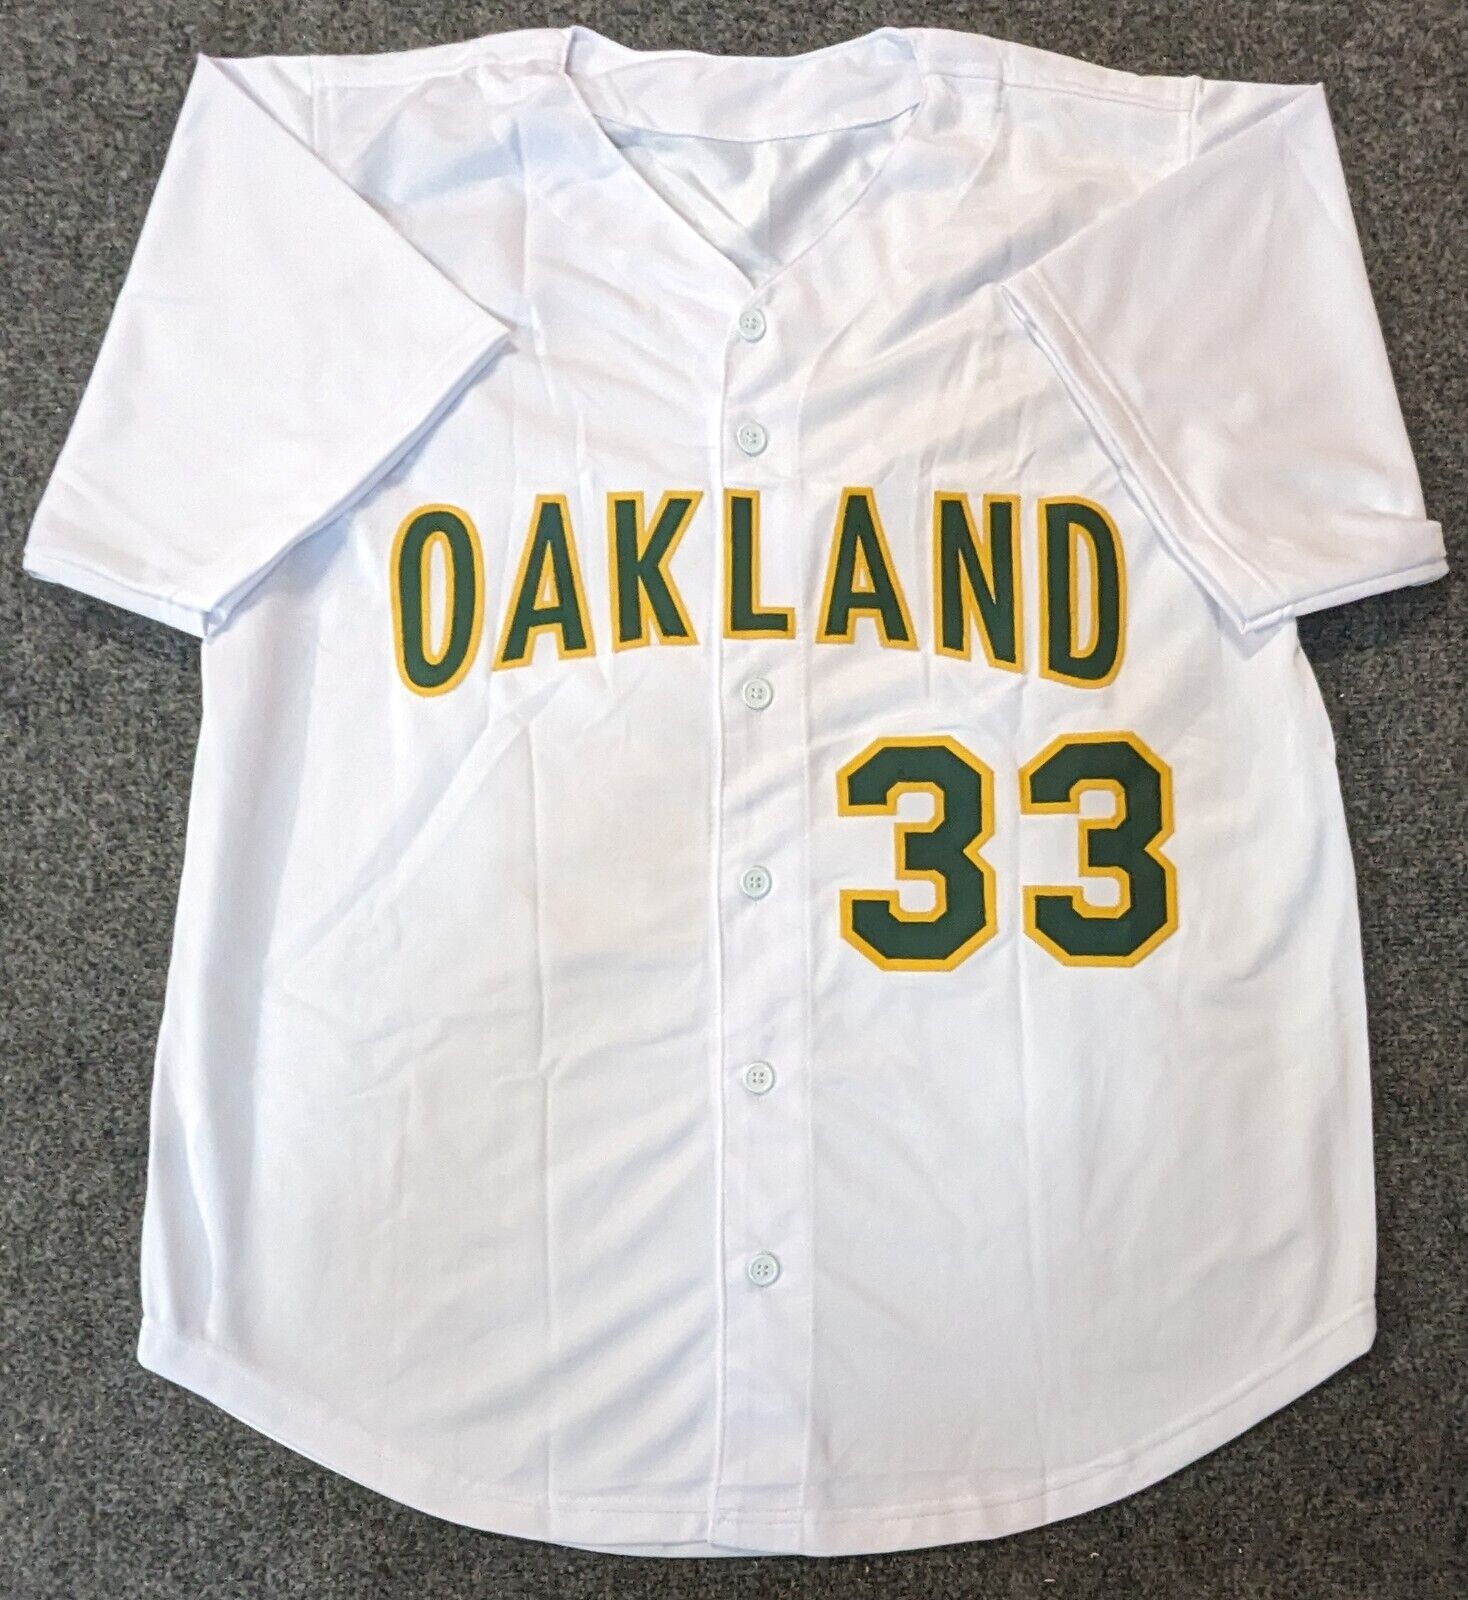 Jose Canseco Oakland Athletics Autographed Yellow Mitchell & Ness Replica  Jersey with 1989 WS Champs Inscription